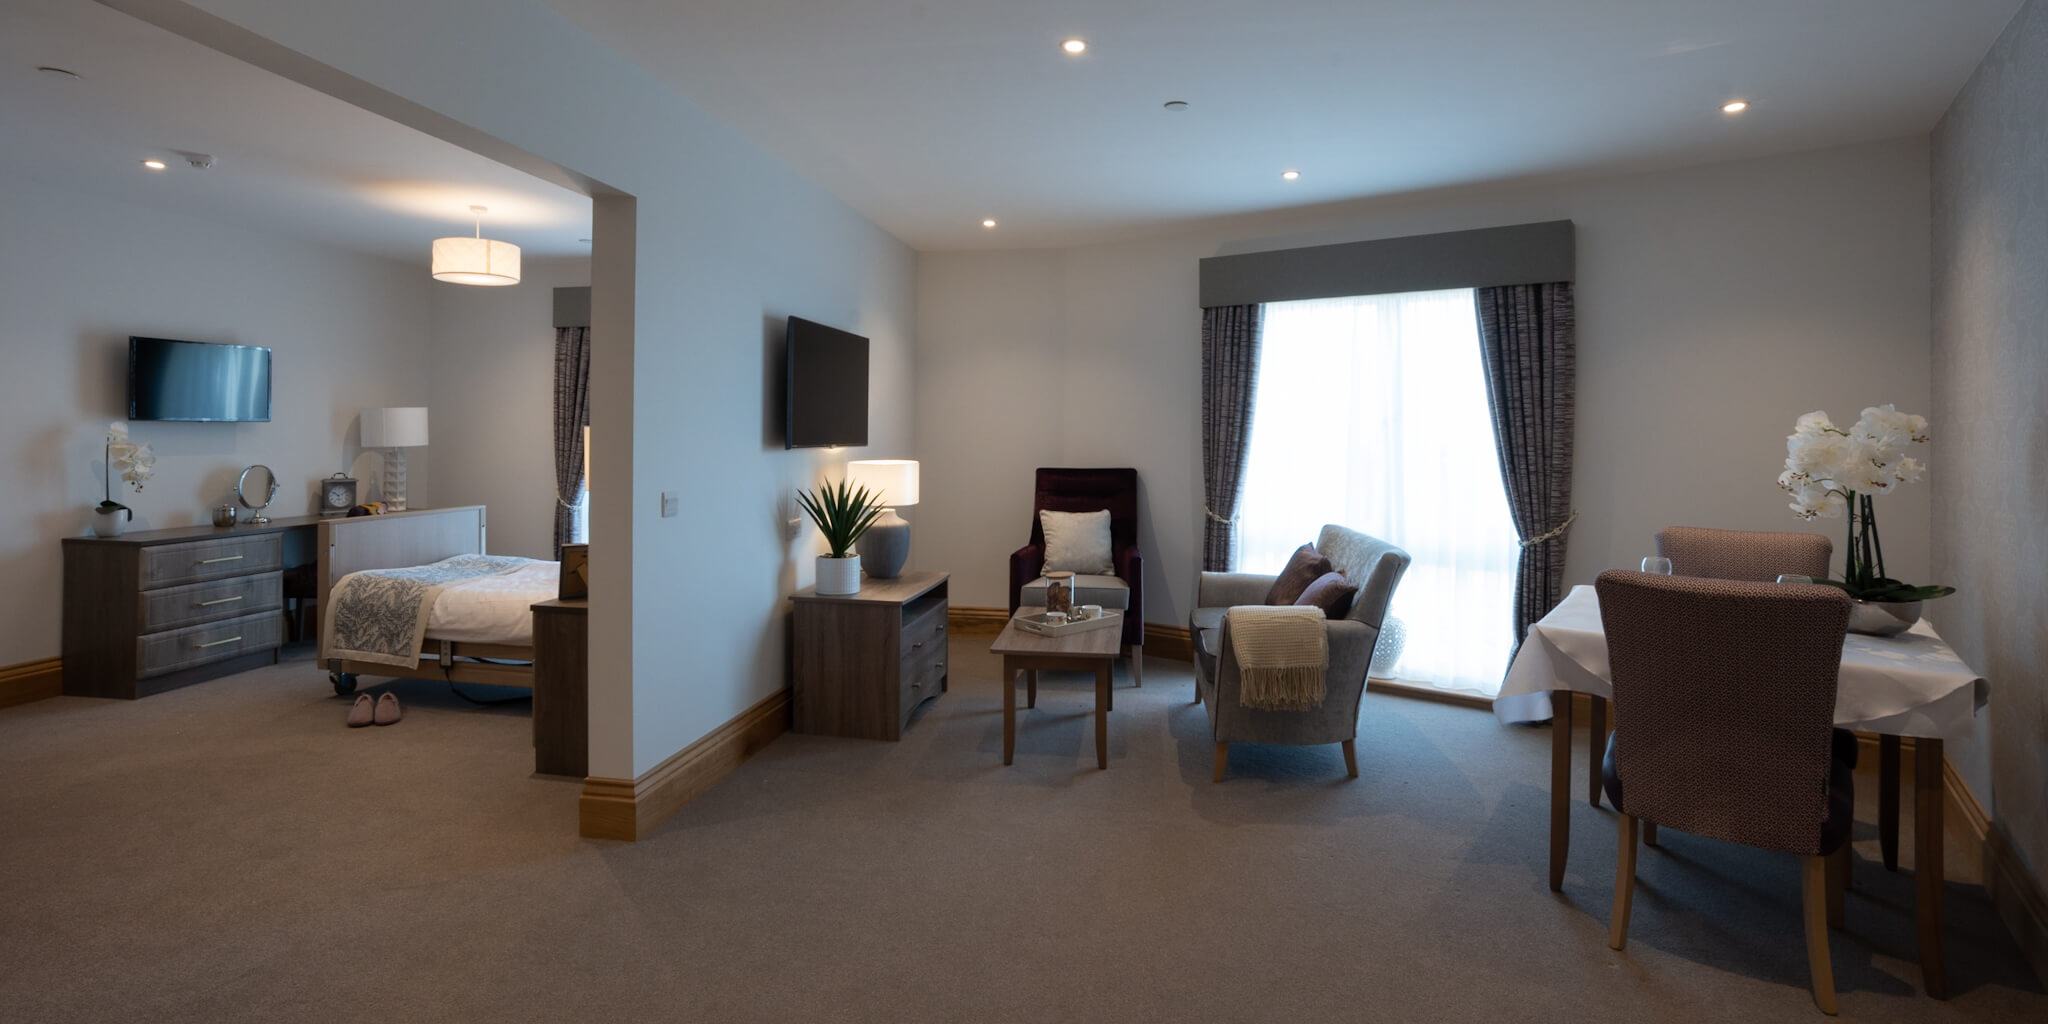 A bedroom suite with archway to lounge. Grey sofa and black armchair with coffee table. Dressed dining room table and chairs. Two sets of patterned curtains and matching bed runner. Vanity table with TV above.